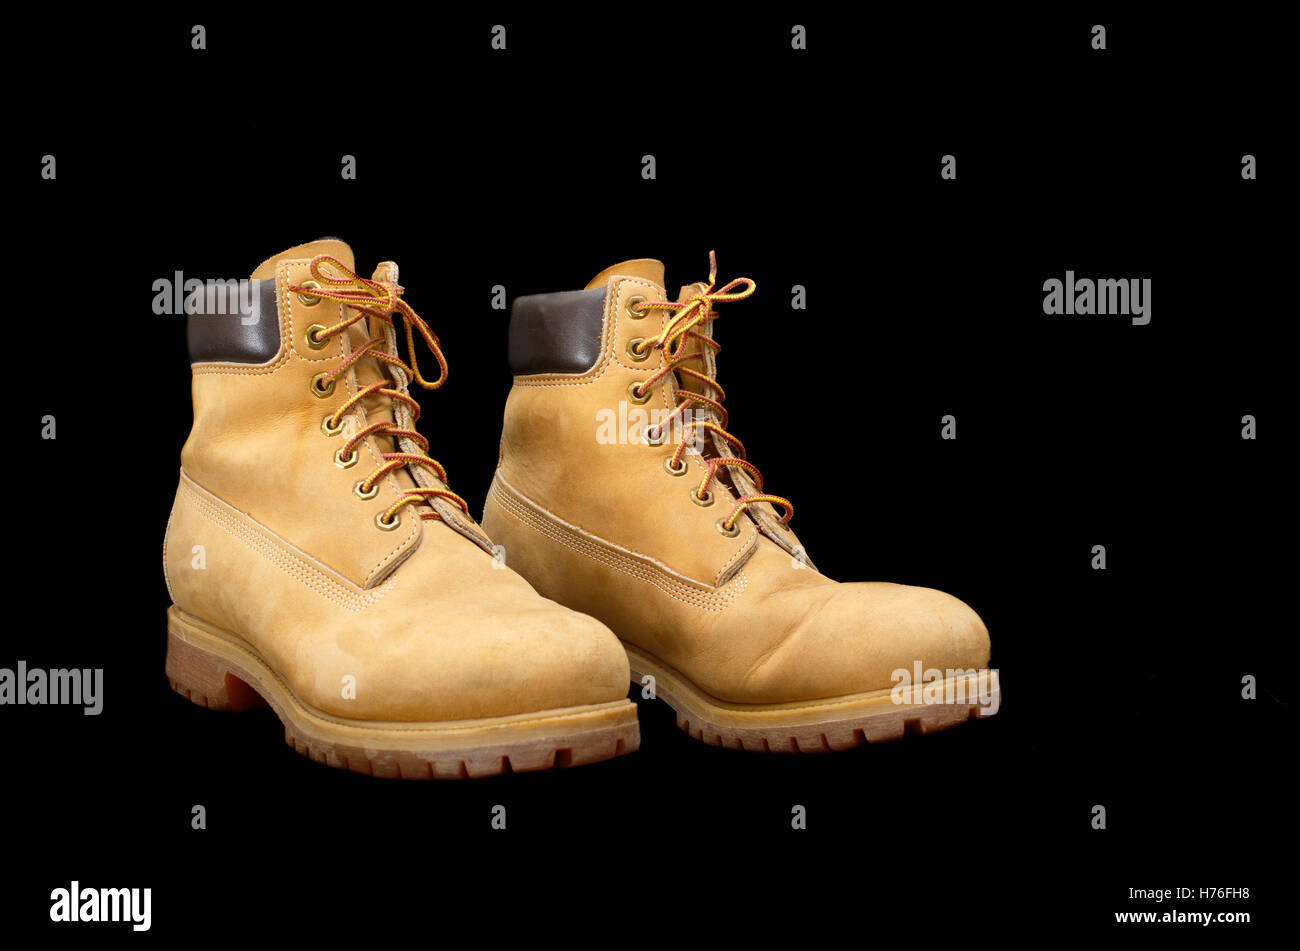 Authentic pair of 8 inch Yellow Work Boots isolated on black Stock Photo